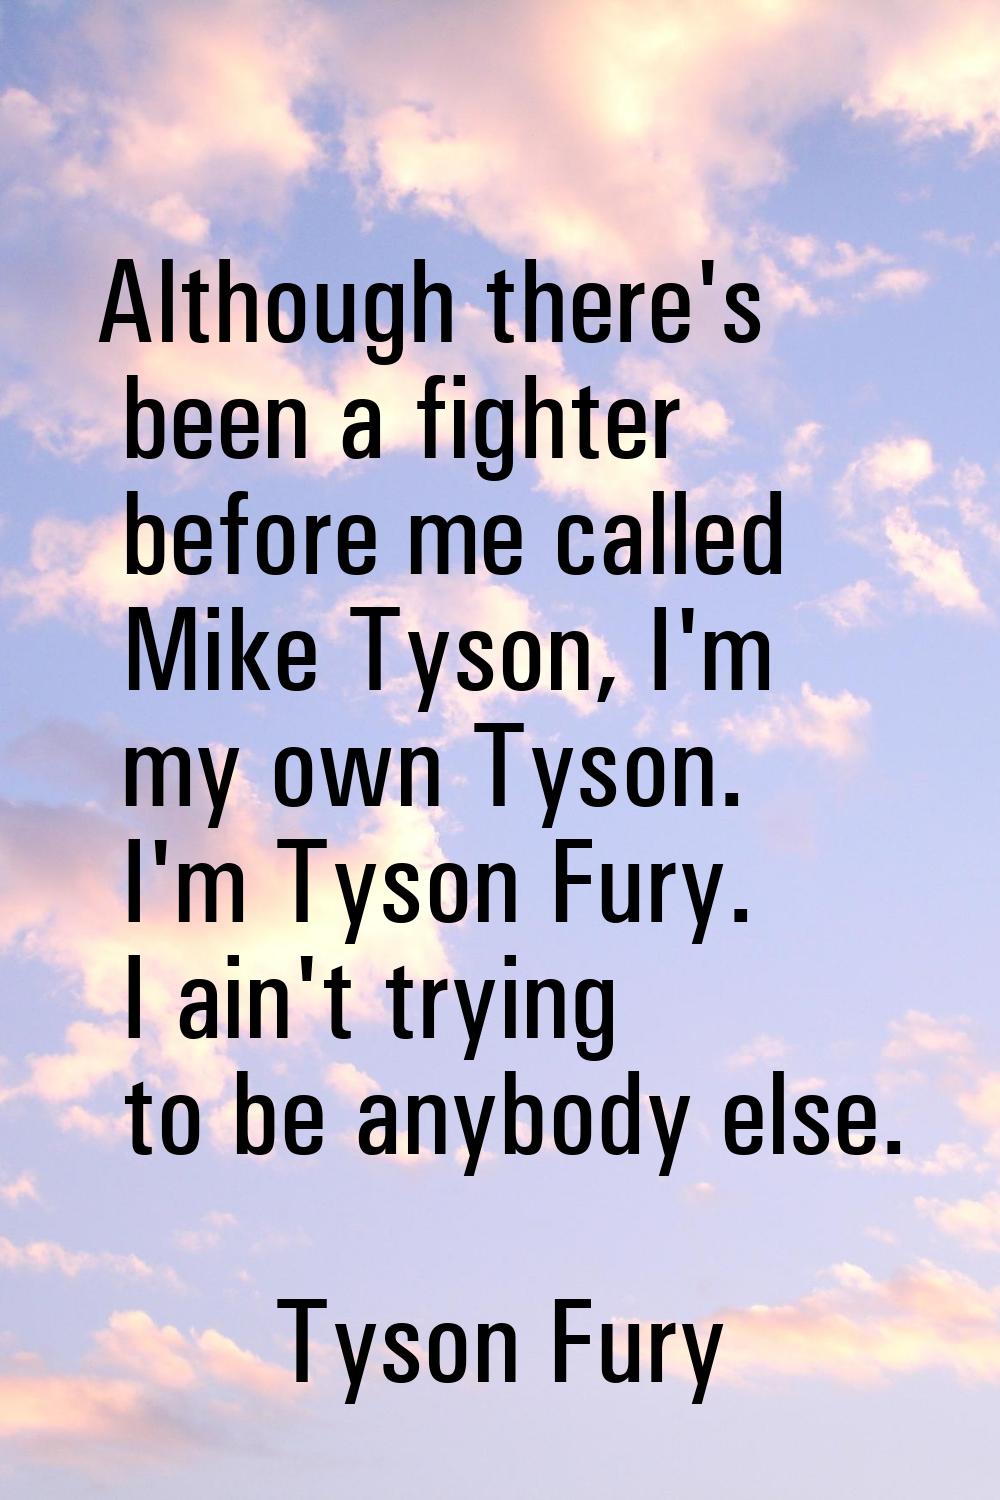 Although there's been a fighter before me called Mike Tyson, I'm my own Tyson. I'm Tyson Fury. I ai